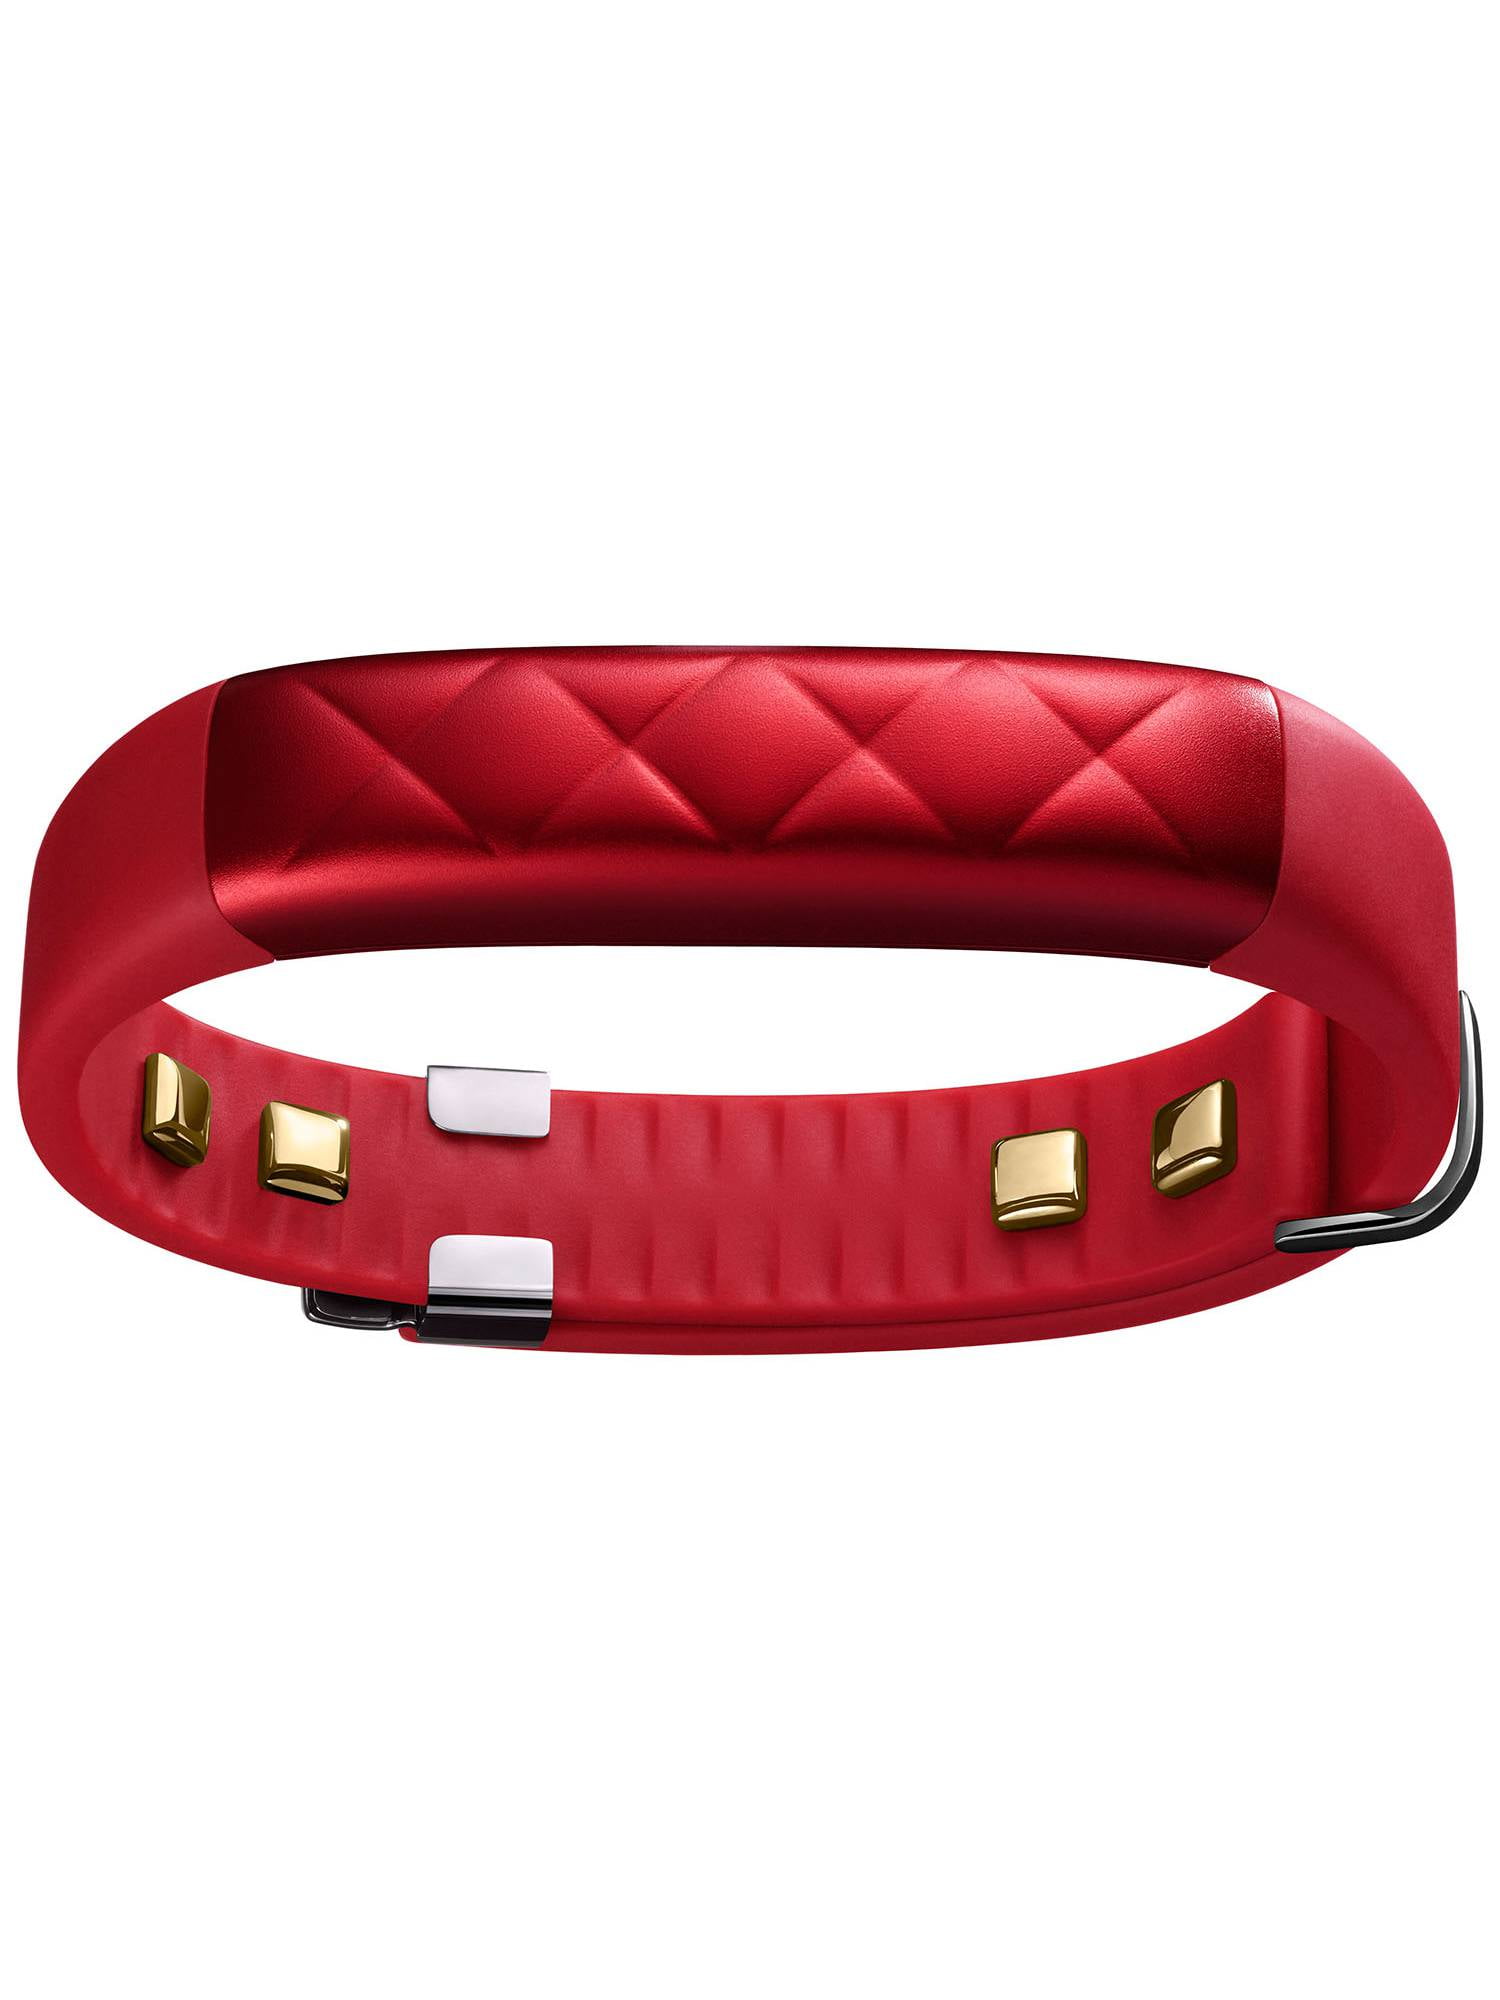 UP by Jawbone Fitness Tracking Wristband in Onyx, Large Without Retail  Packaging - Walmart.com